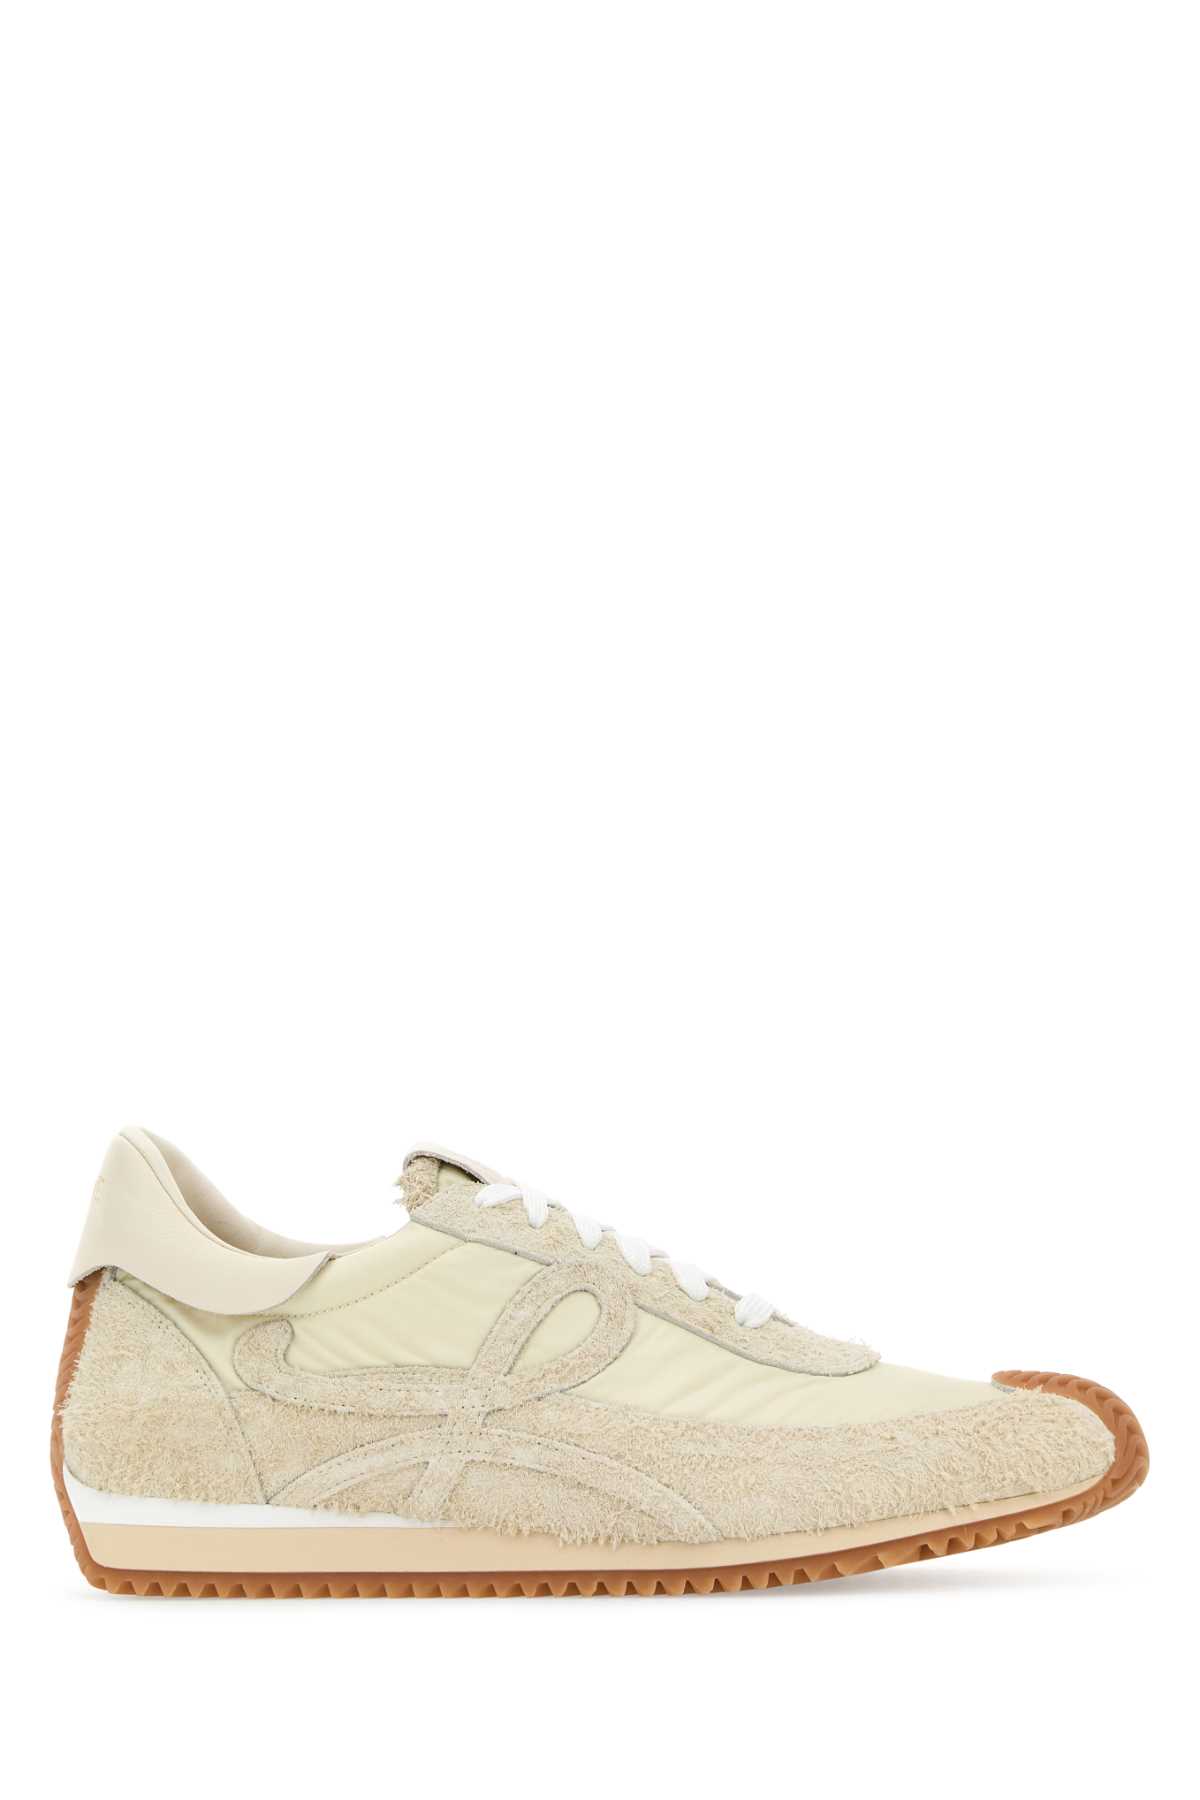 Loewe Ivory Suede And Nylon Flow Runner Sneakers In Canvassoftwhite